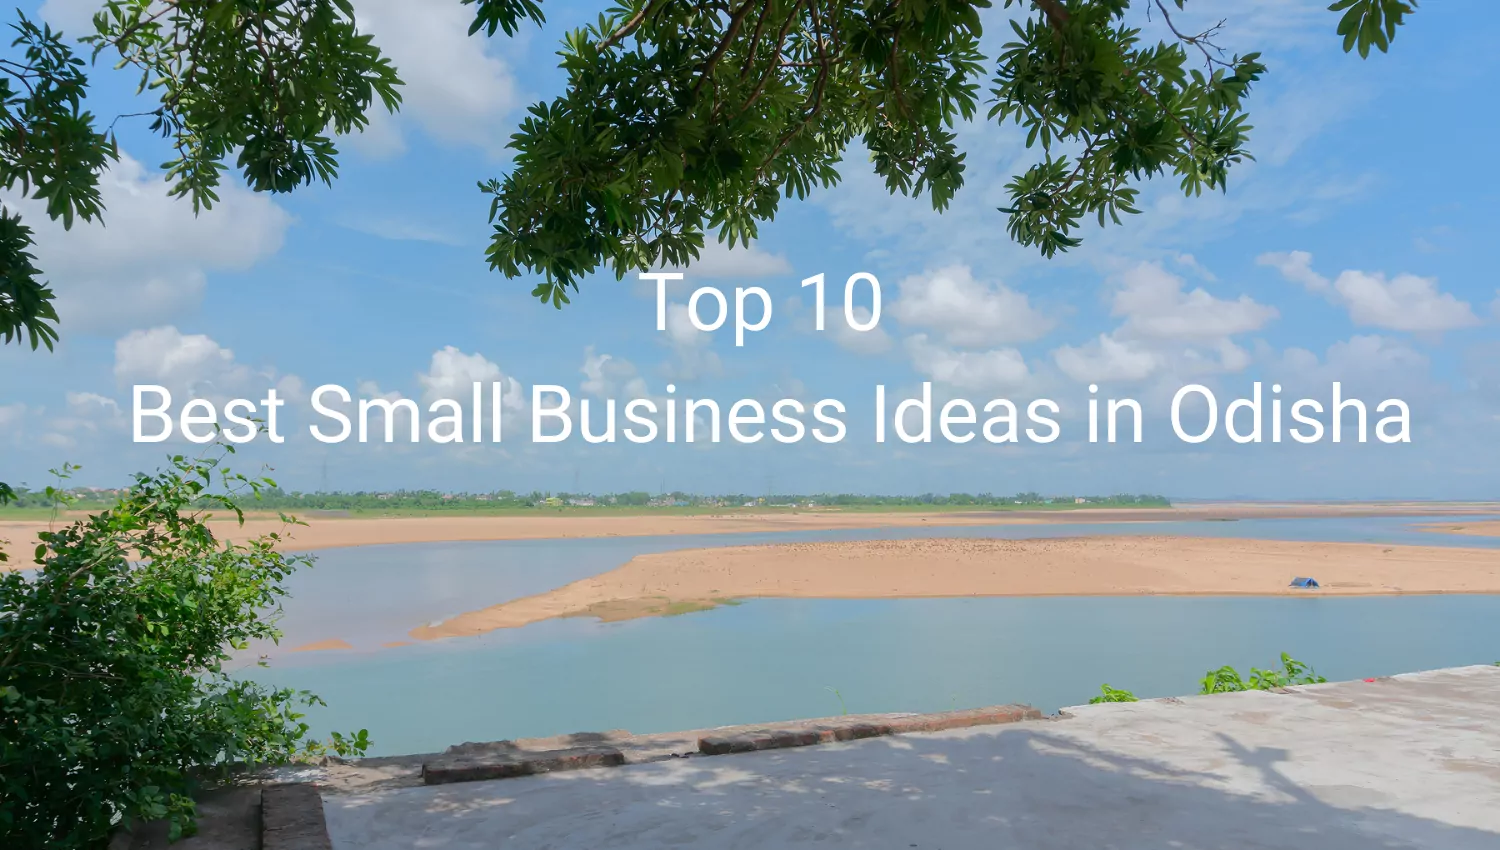 Business-Ideas-in-Odisha-Top-10-Best-Small-Successful-Profitable-with-Low-Investment-